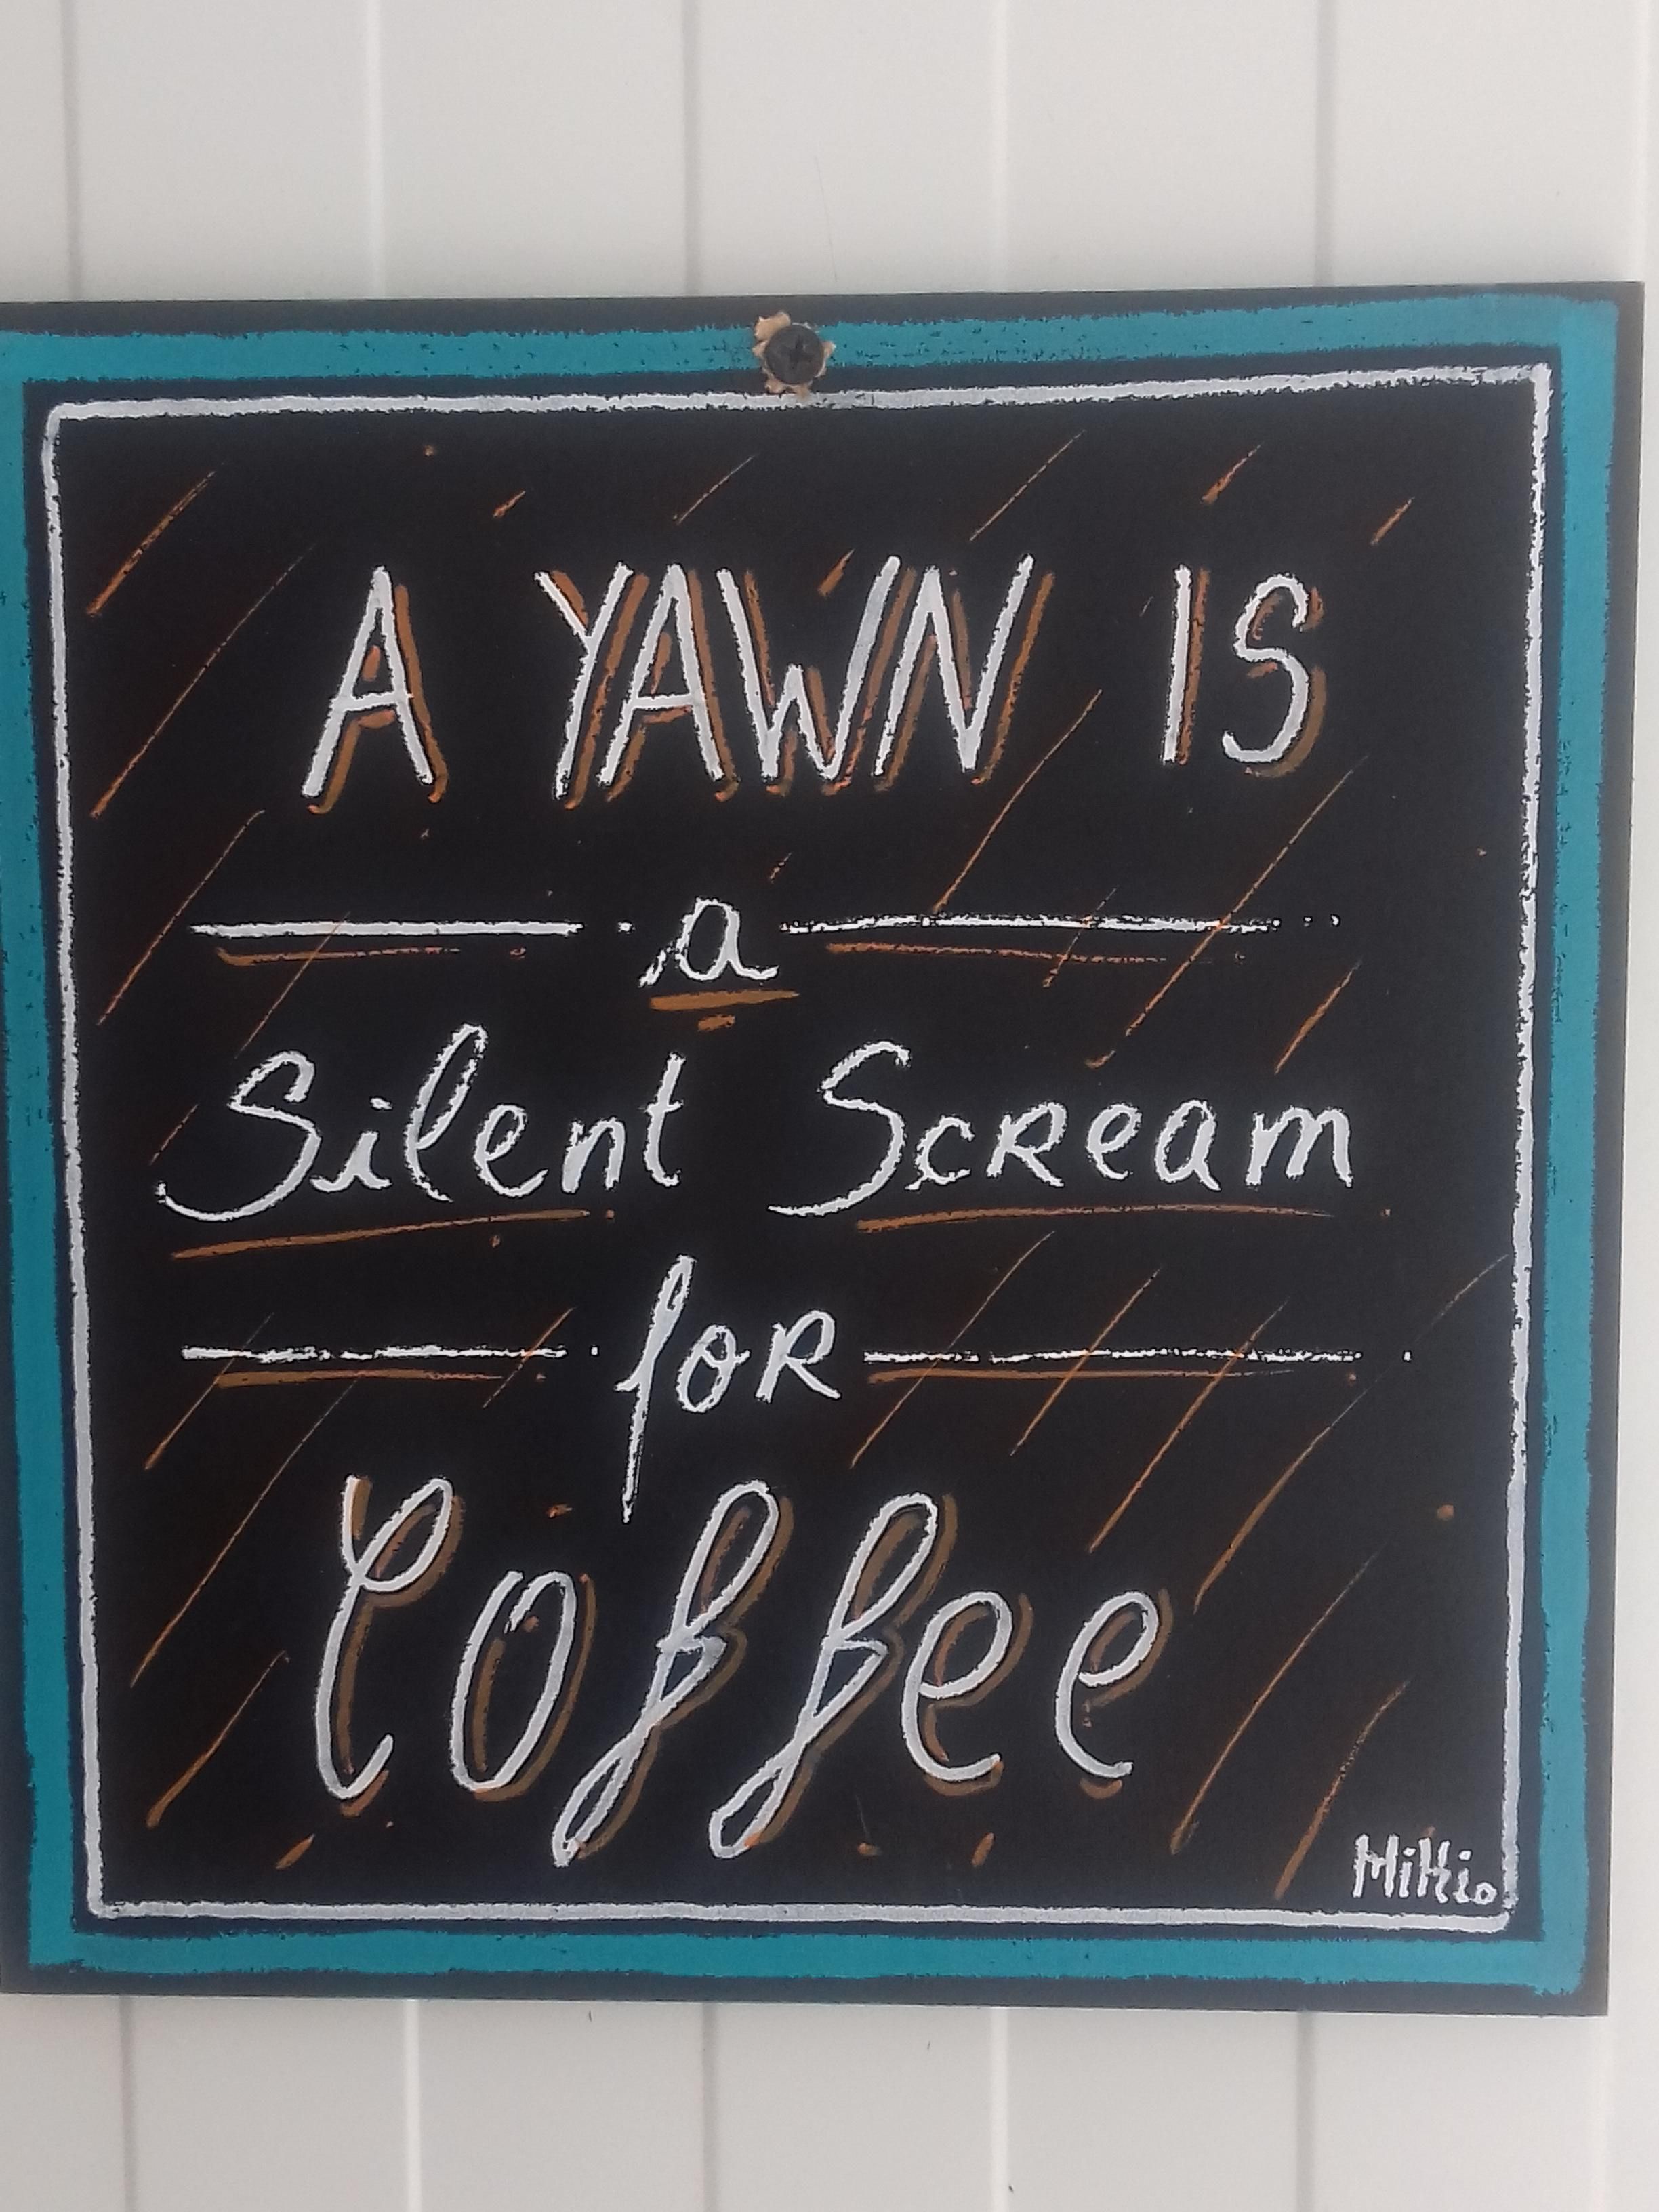 Sign at my local cofee place